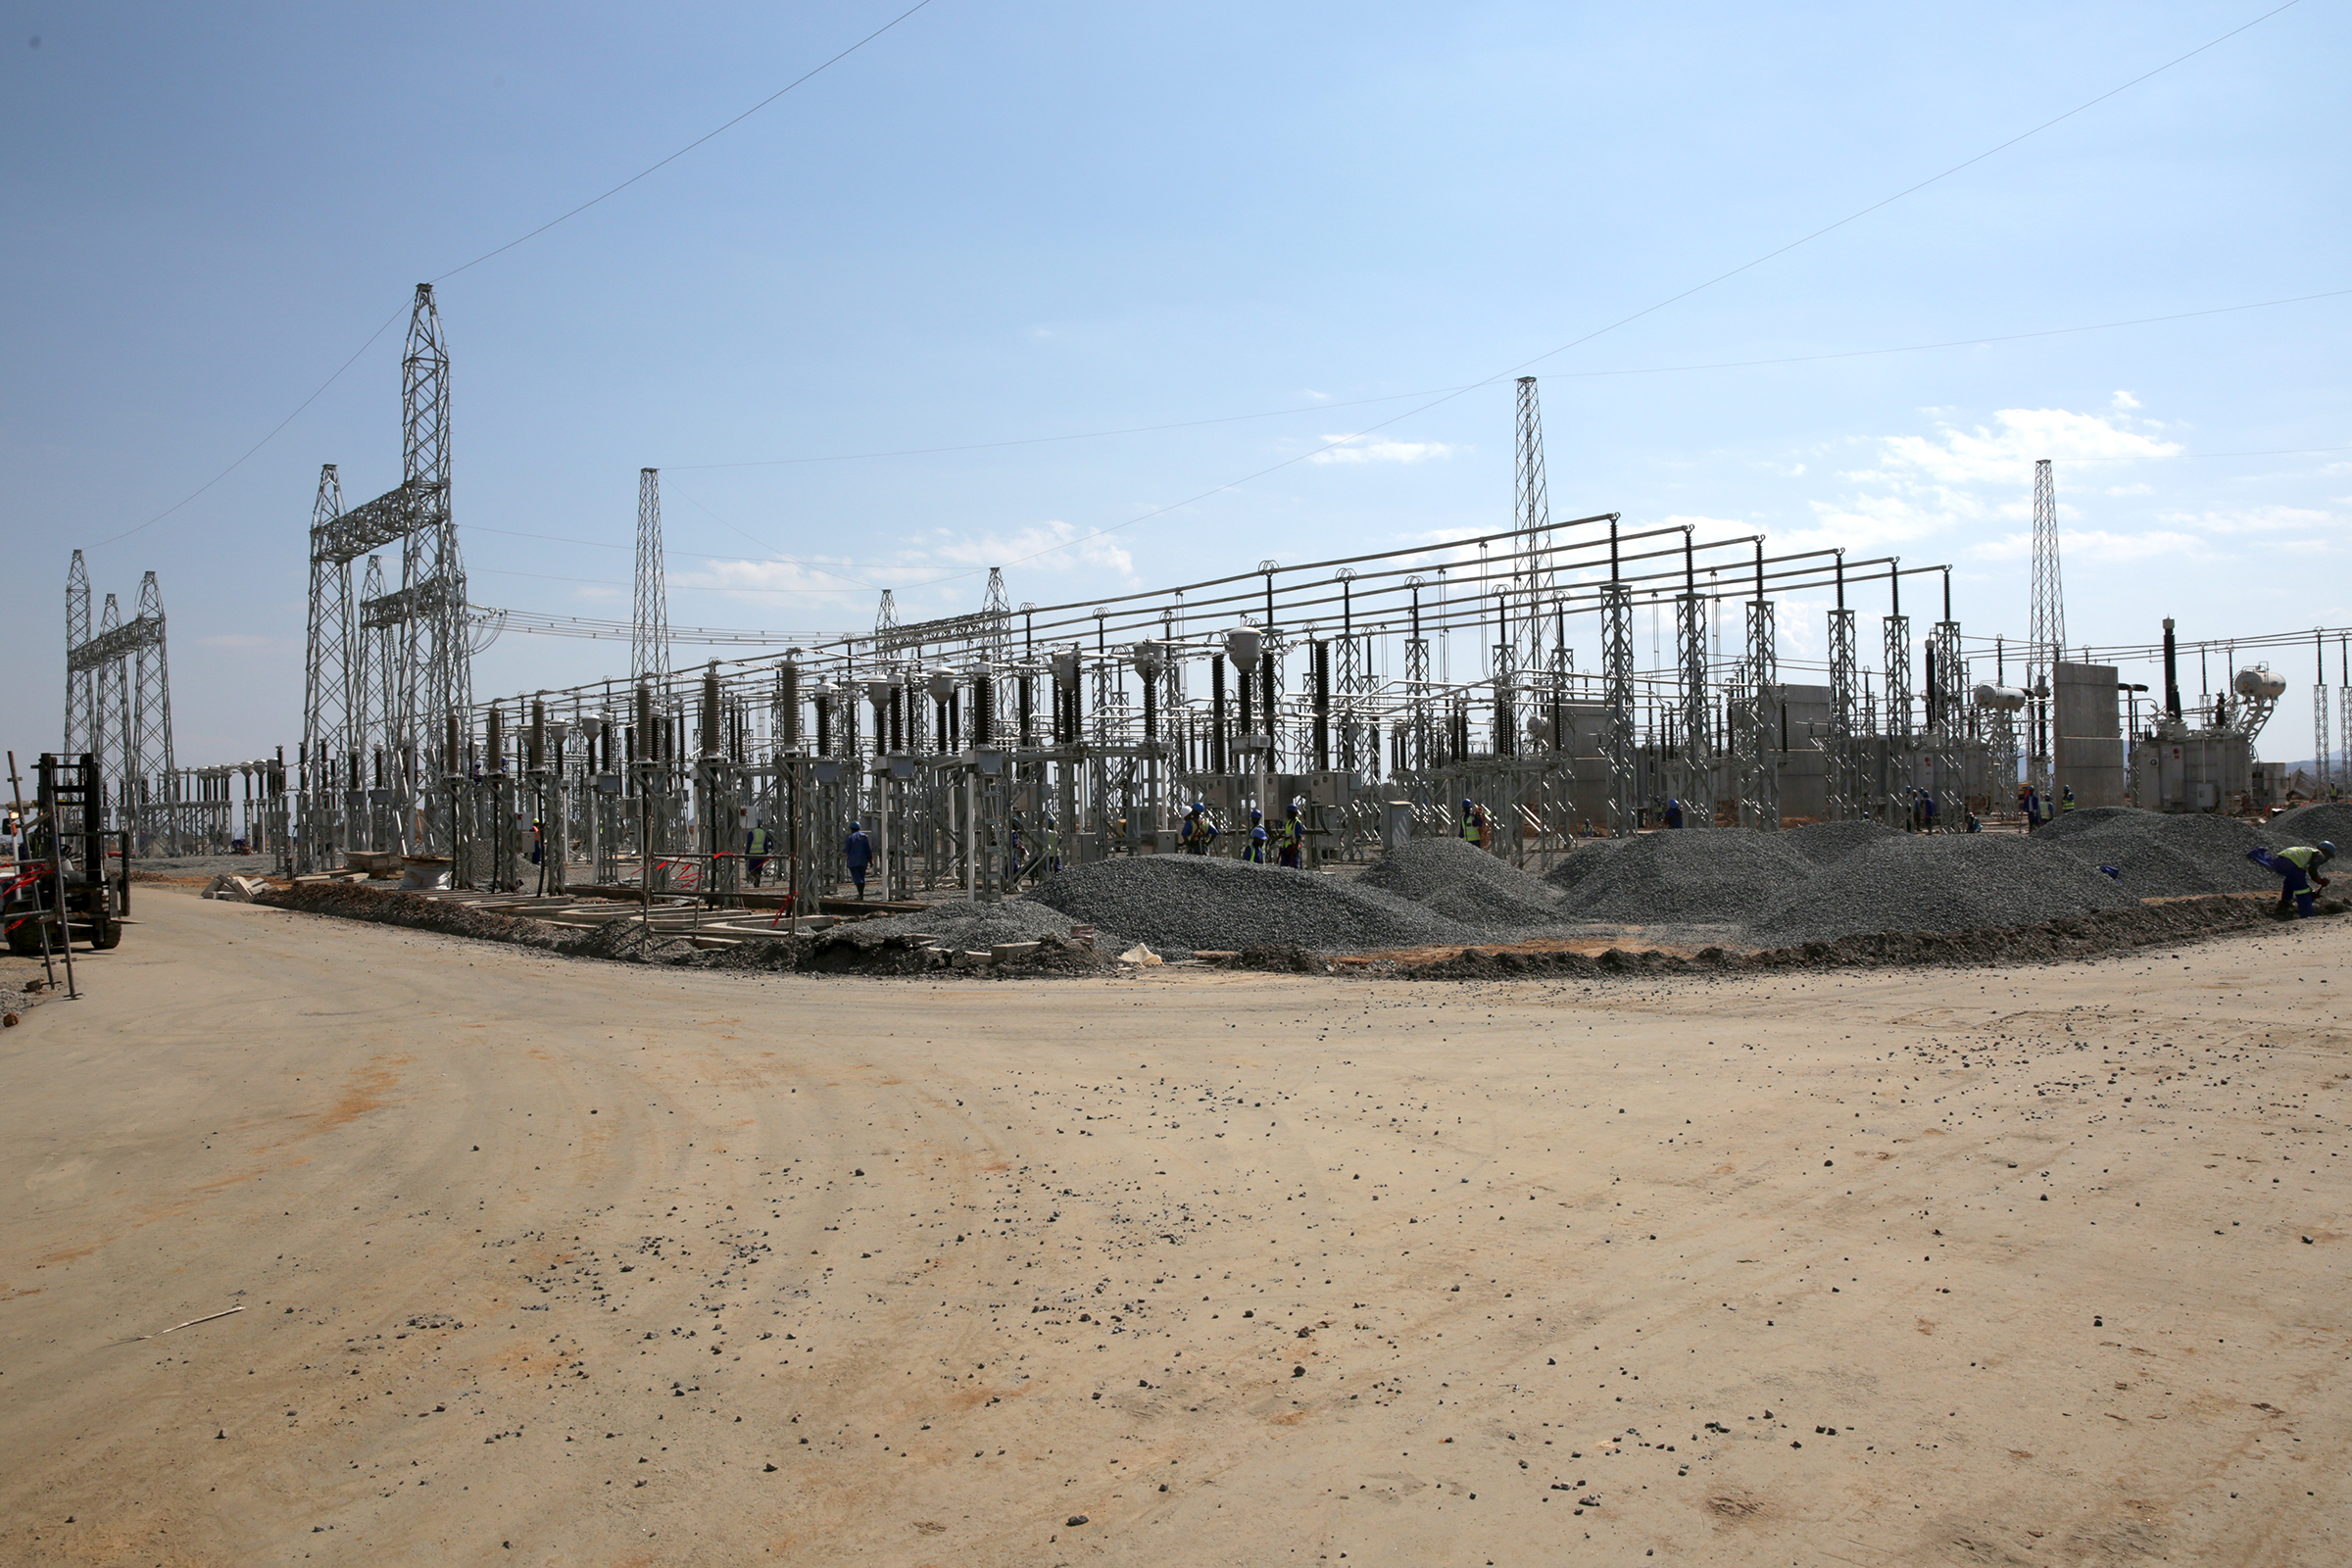 Wide-angle photograph of transmission substation